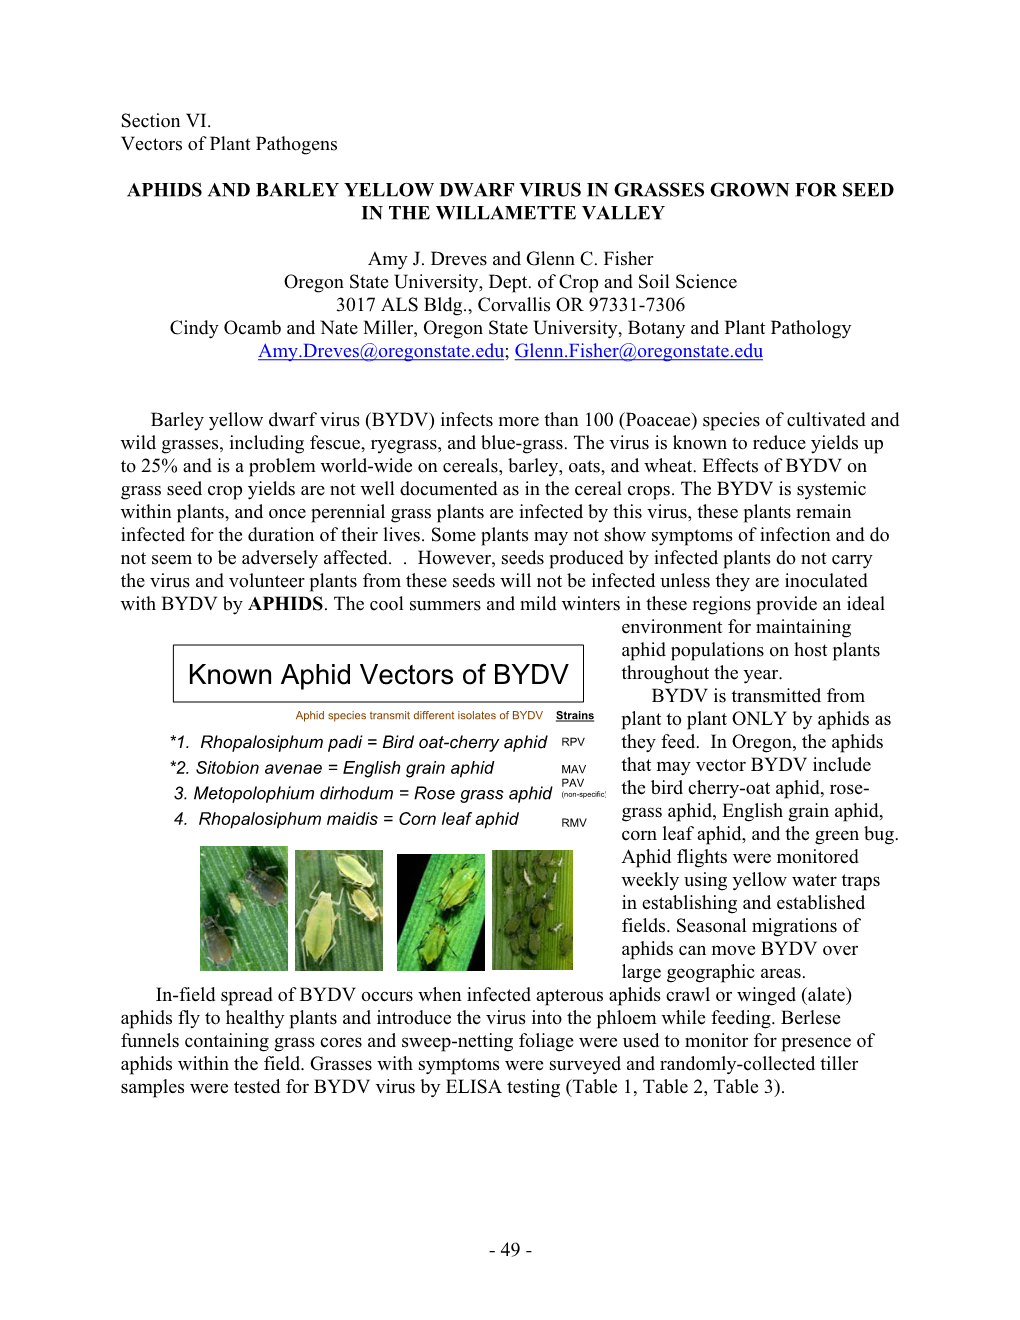 Known Aphid Vectors of BYDV Throughout the Year